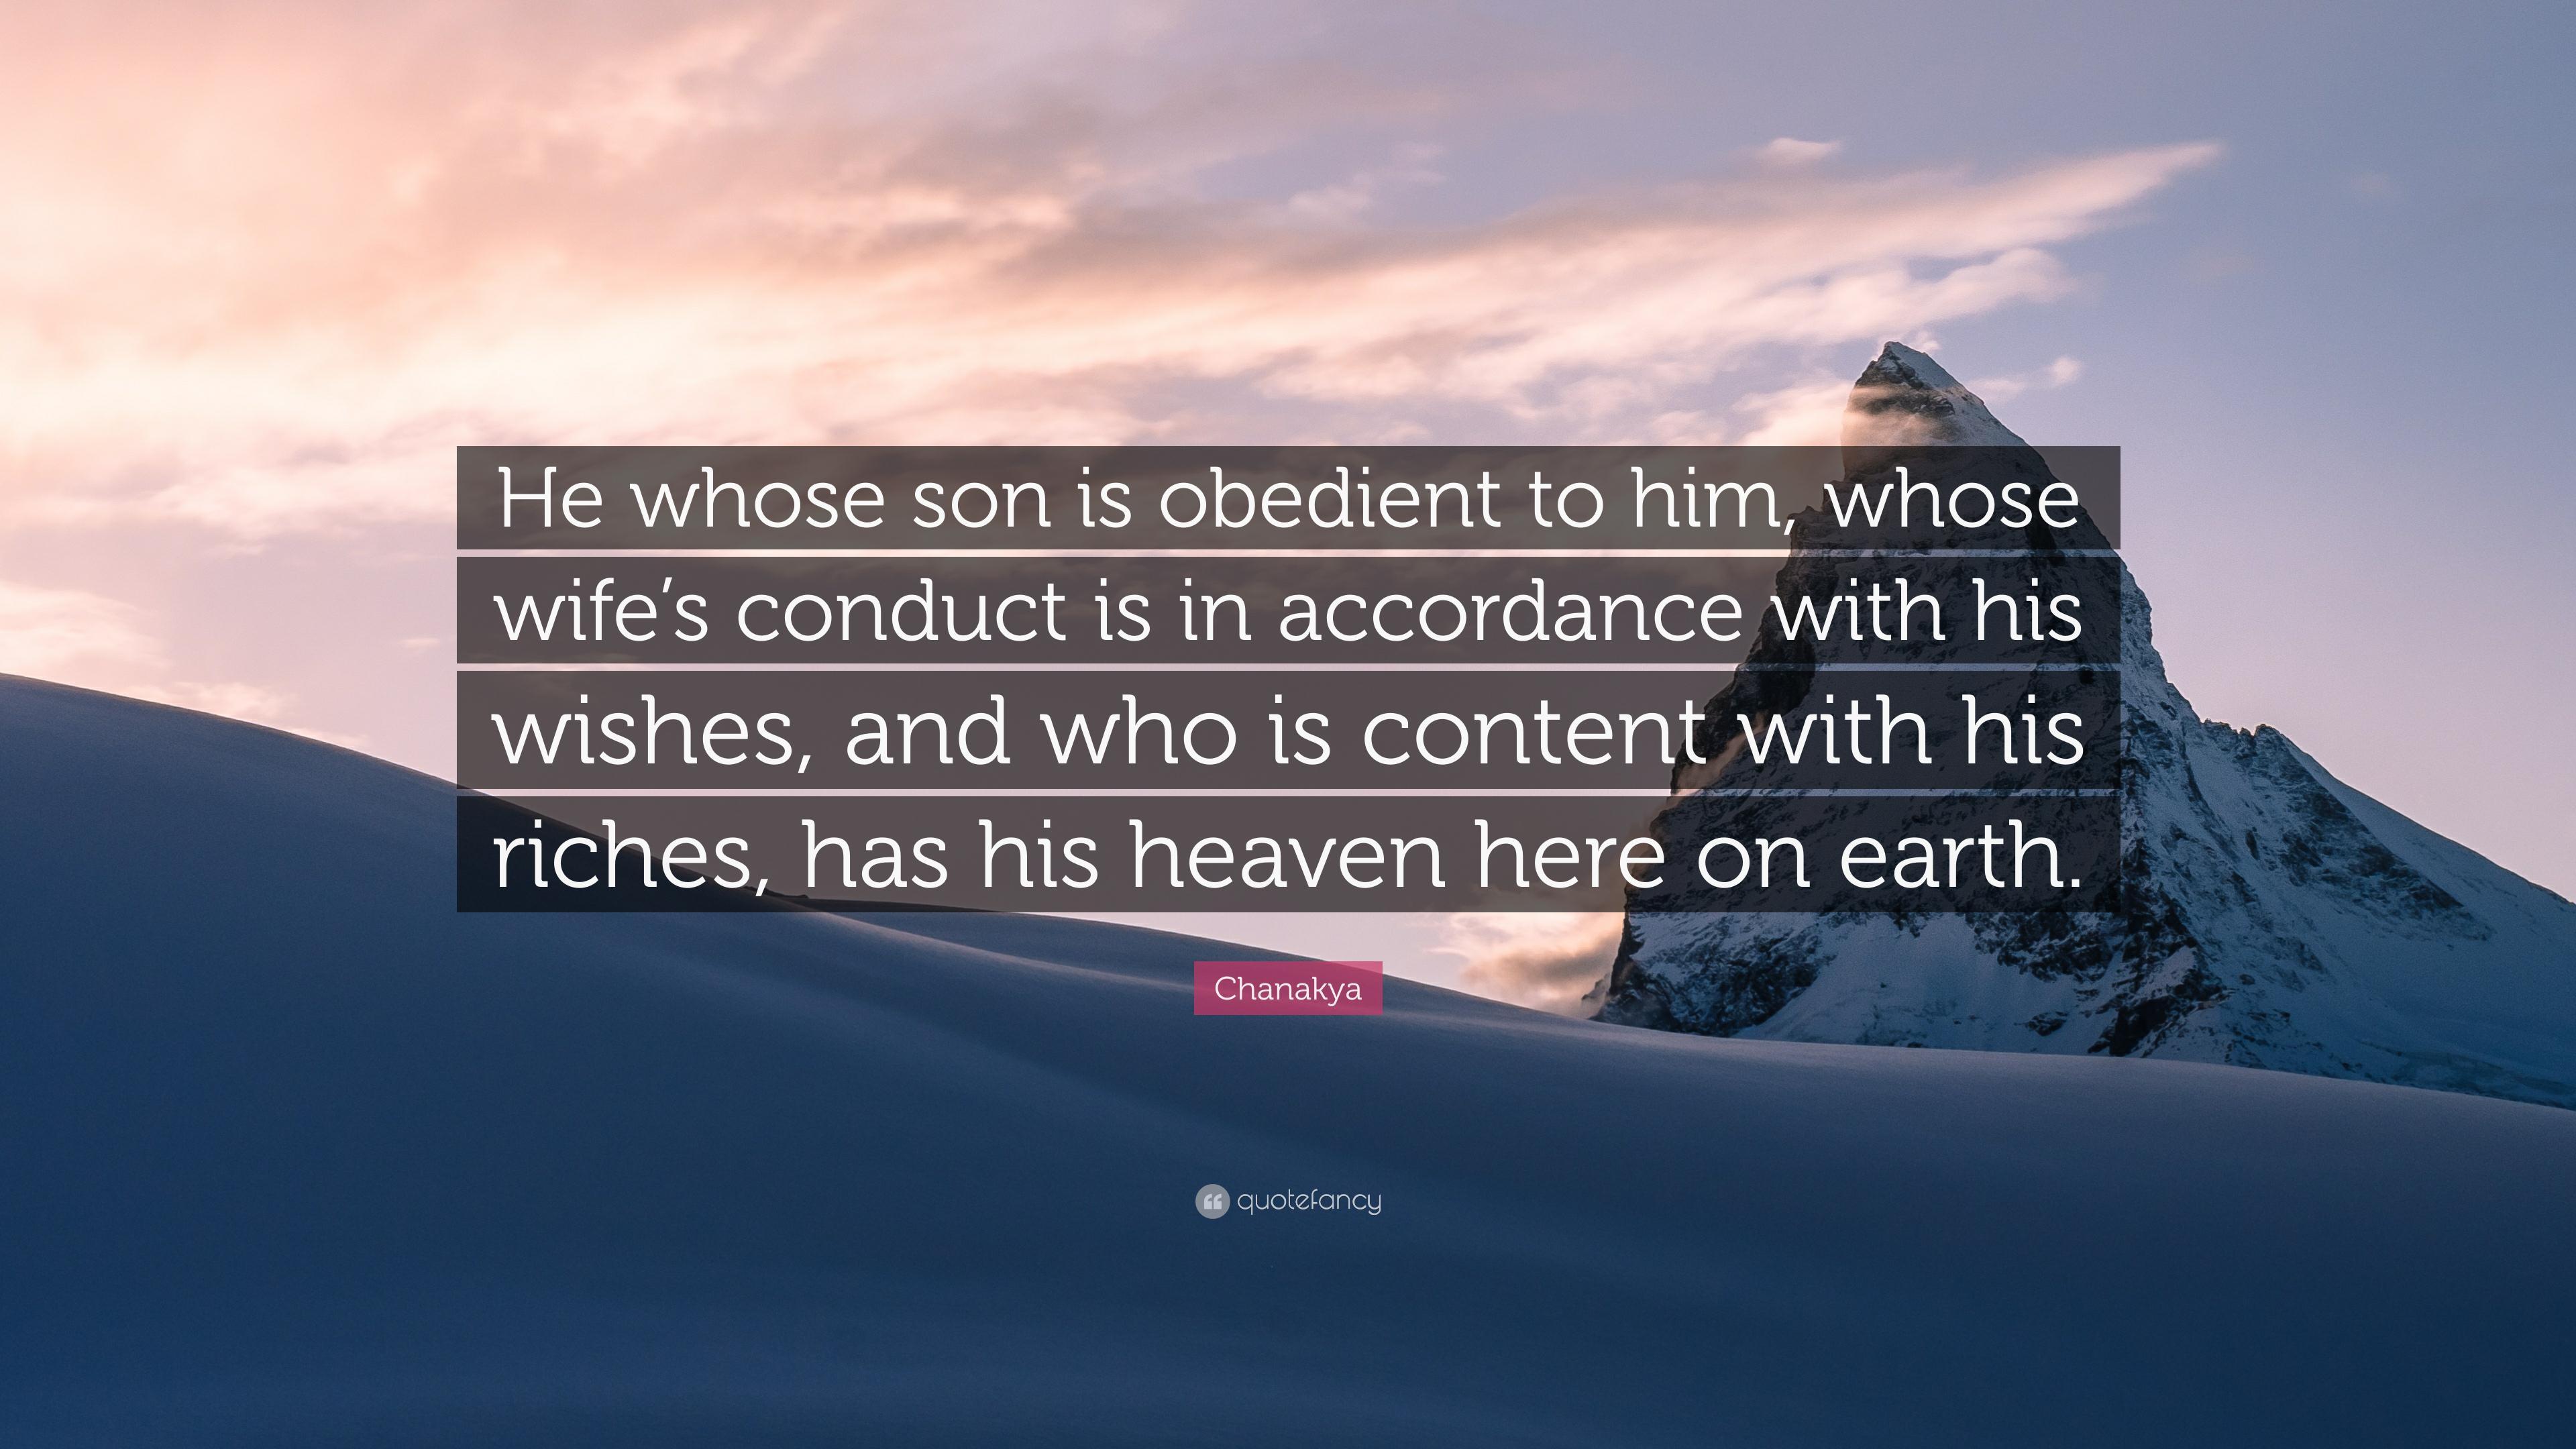 Chanakya Quote: “He whose son is obedient to him, whose wife's